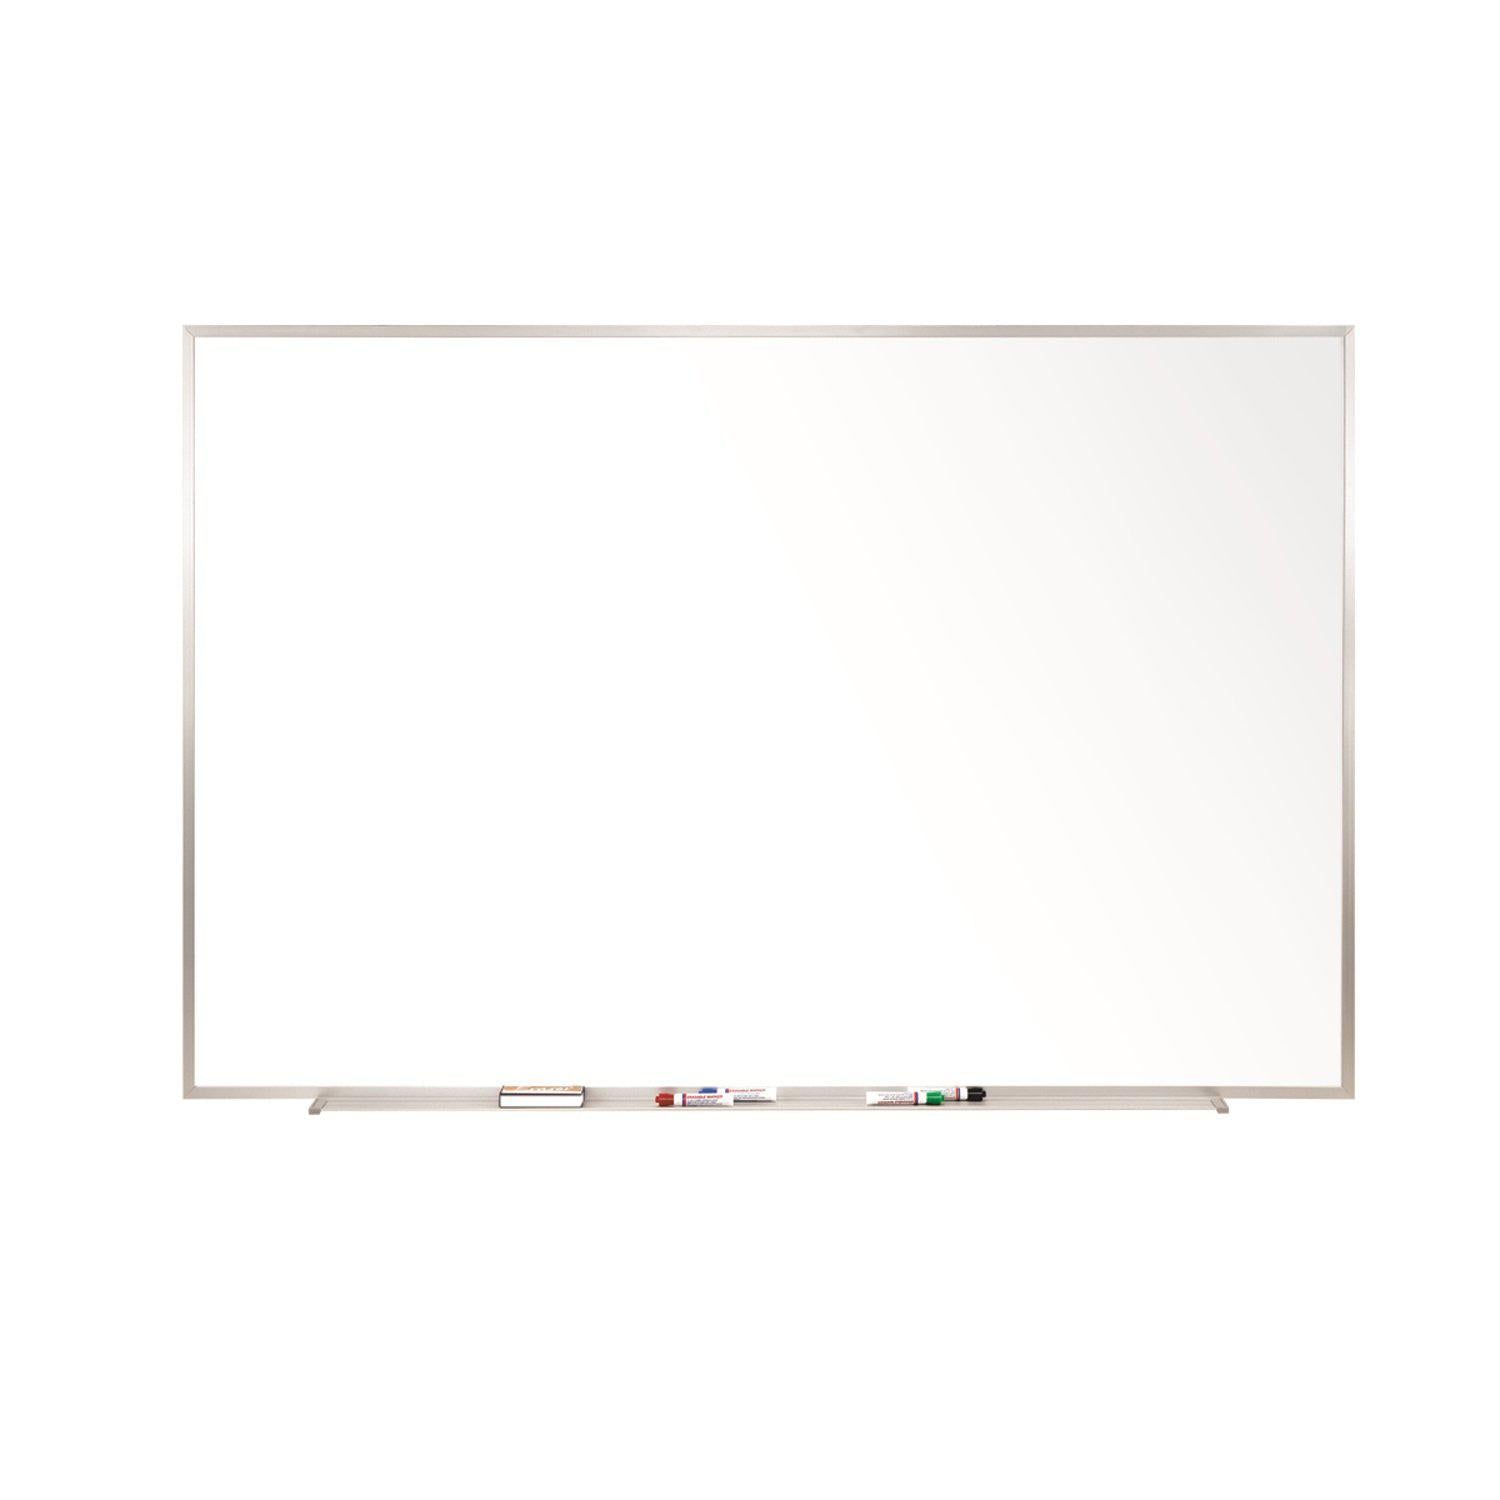 Magnetic Porcelain Whiteboard with Detachable Marker Tray, Satin Aluminum Frame, 4' H x 10' W, LIFETIME WARRANTY